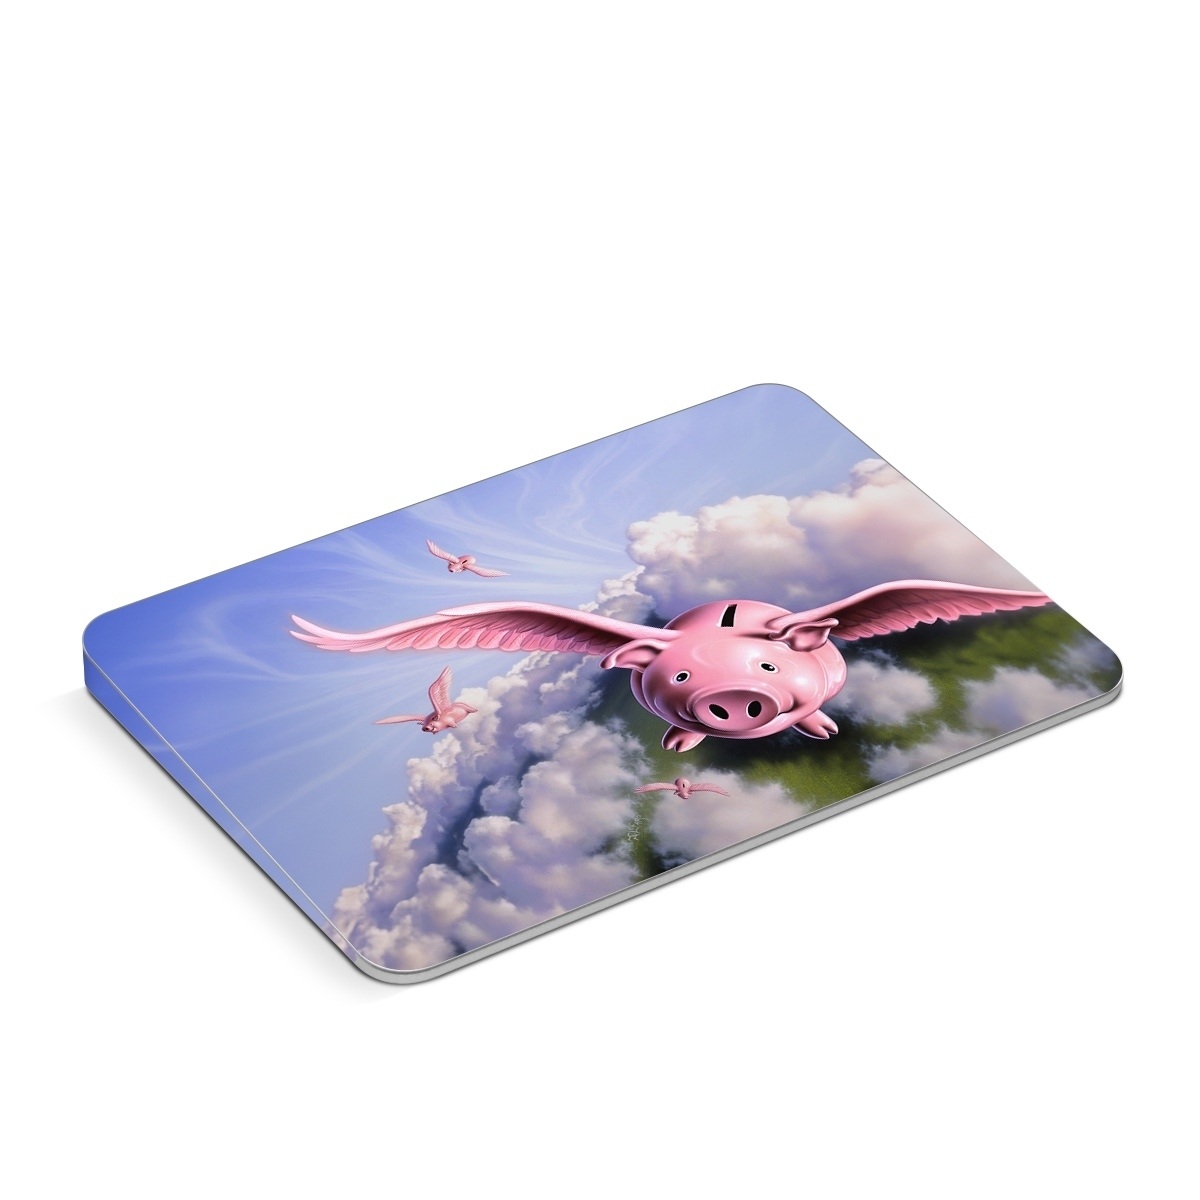 Apple Magic Trackpad Skin design of Cloud, Sky, Happy, Pink, Bird, Art, Wing, Snout, Wind, Fictional character, with pink, white, blue, gray, green colors